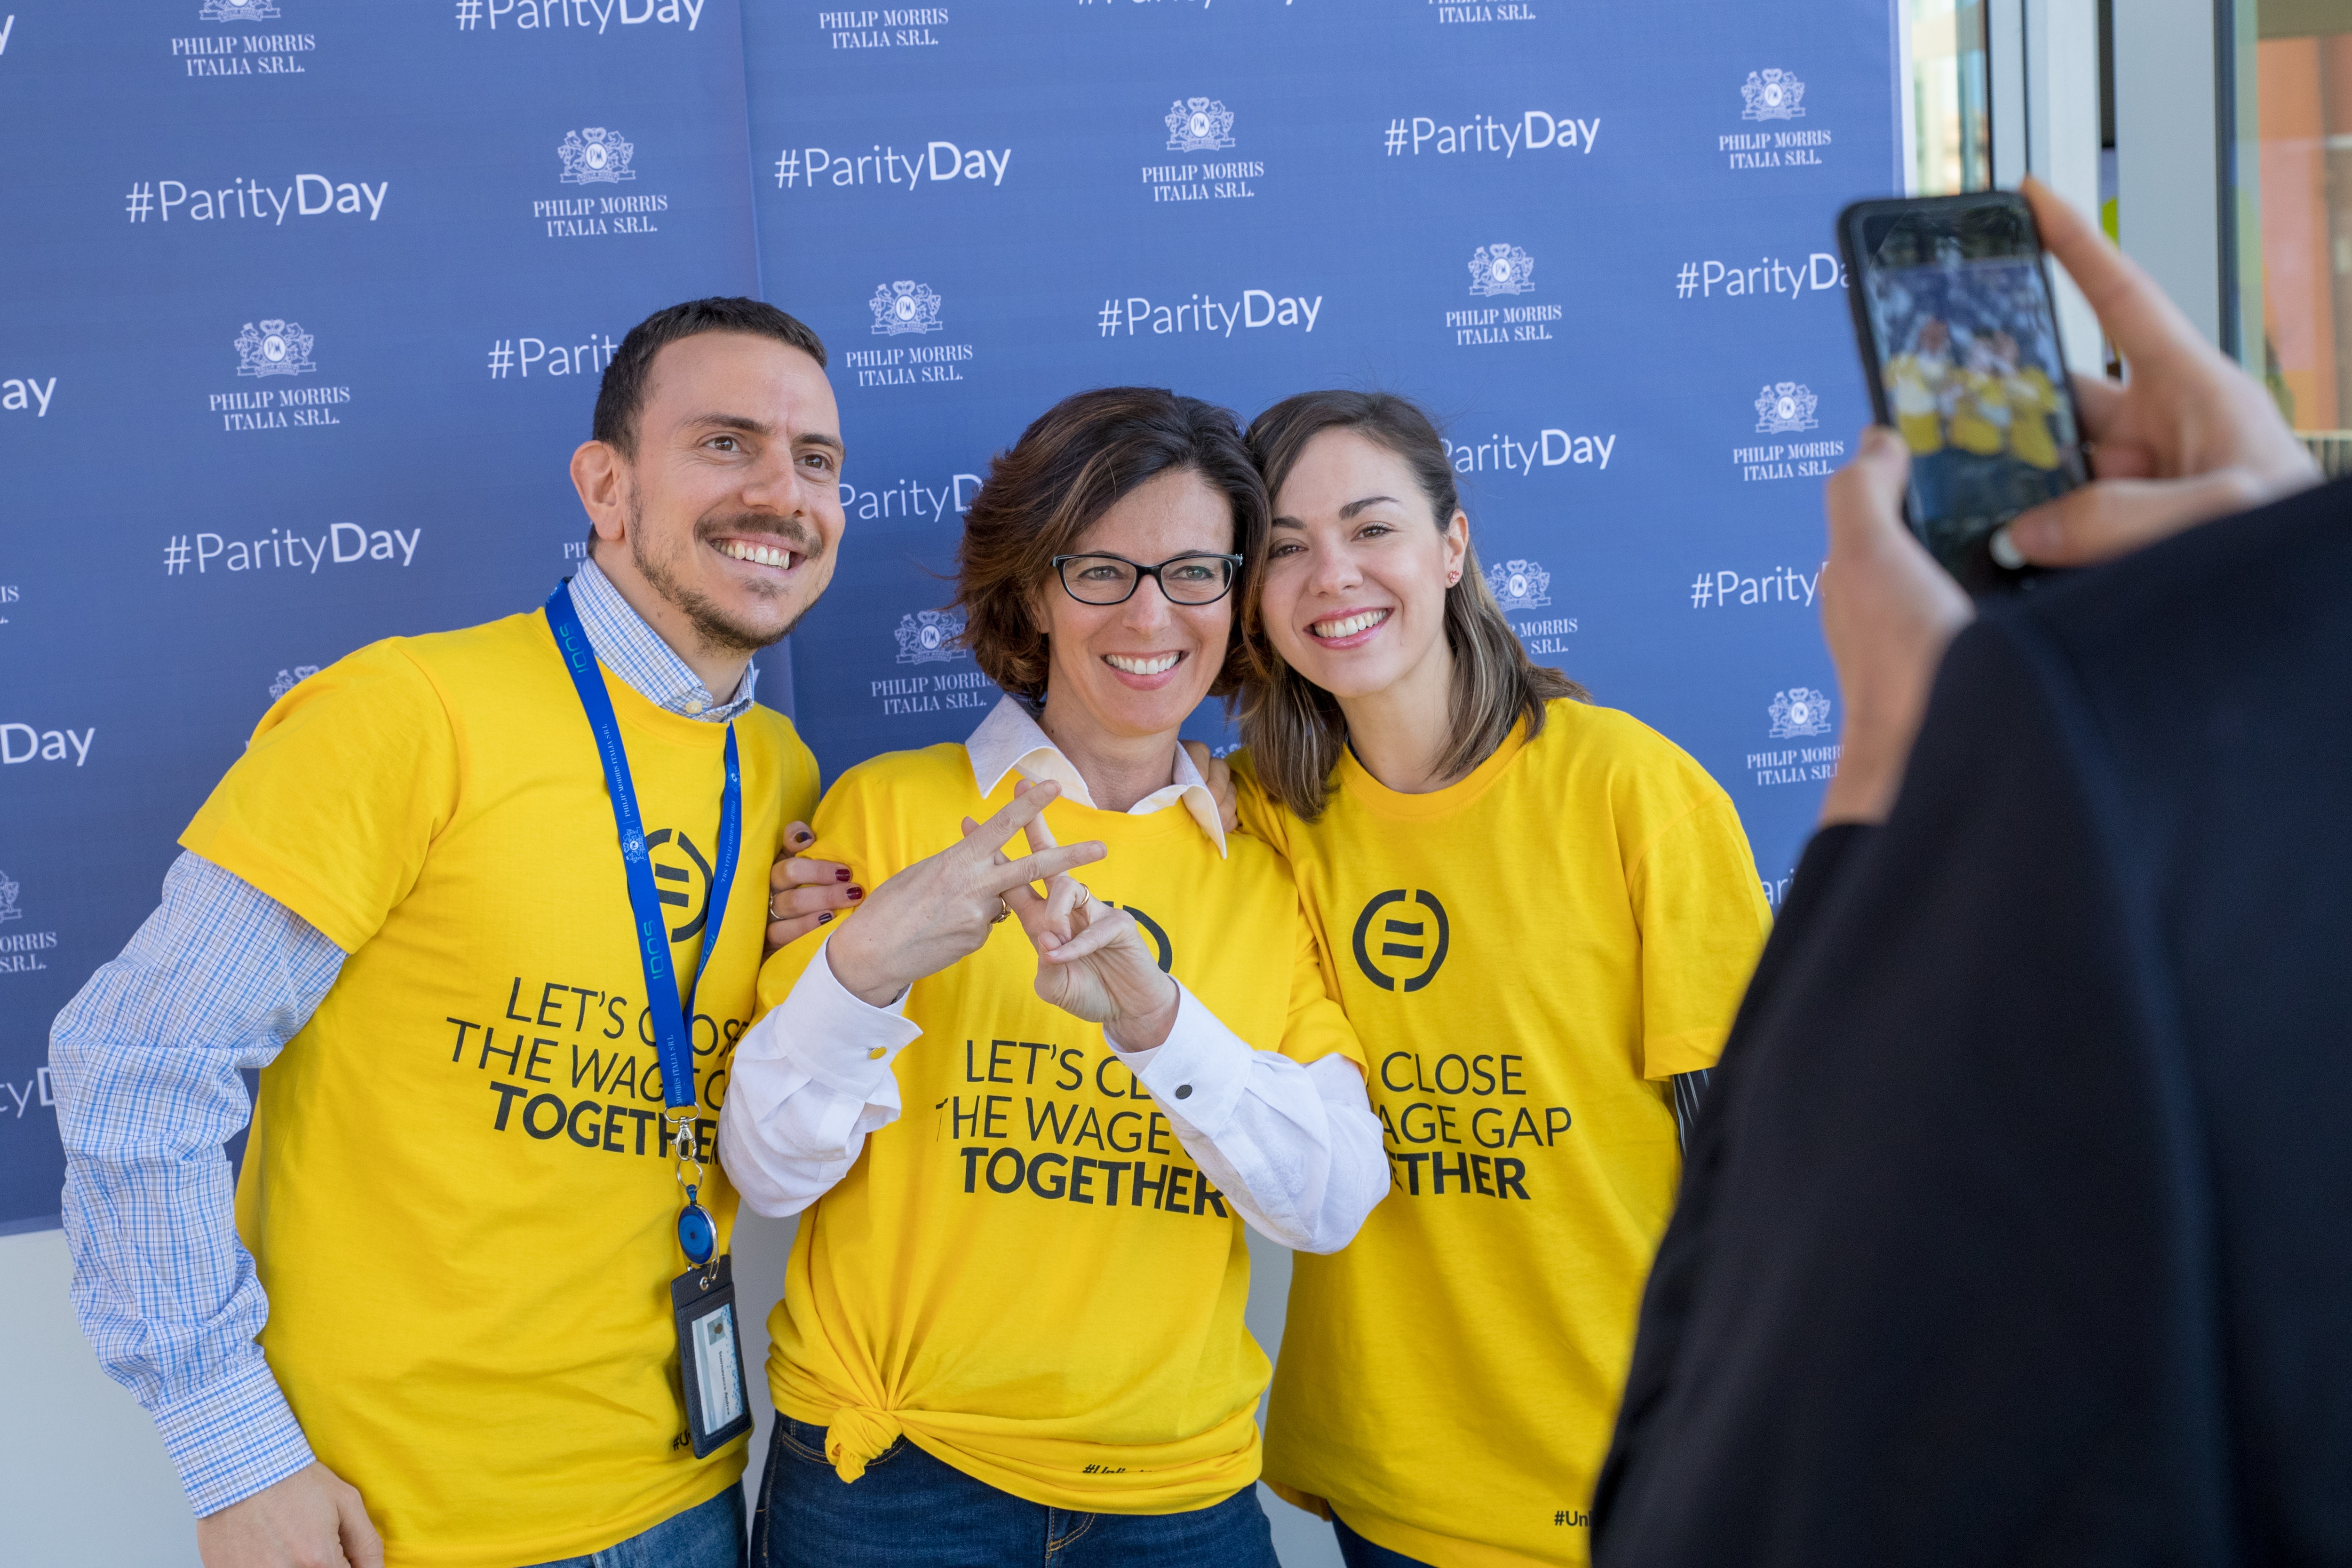 Two women and a man wearing yellow T-shirts to promote gender pay parity targets.